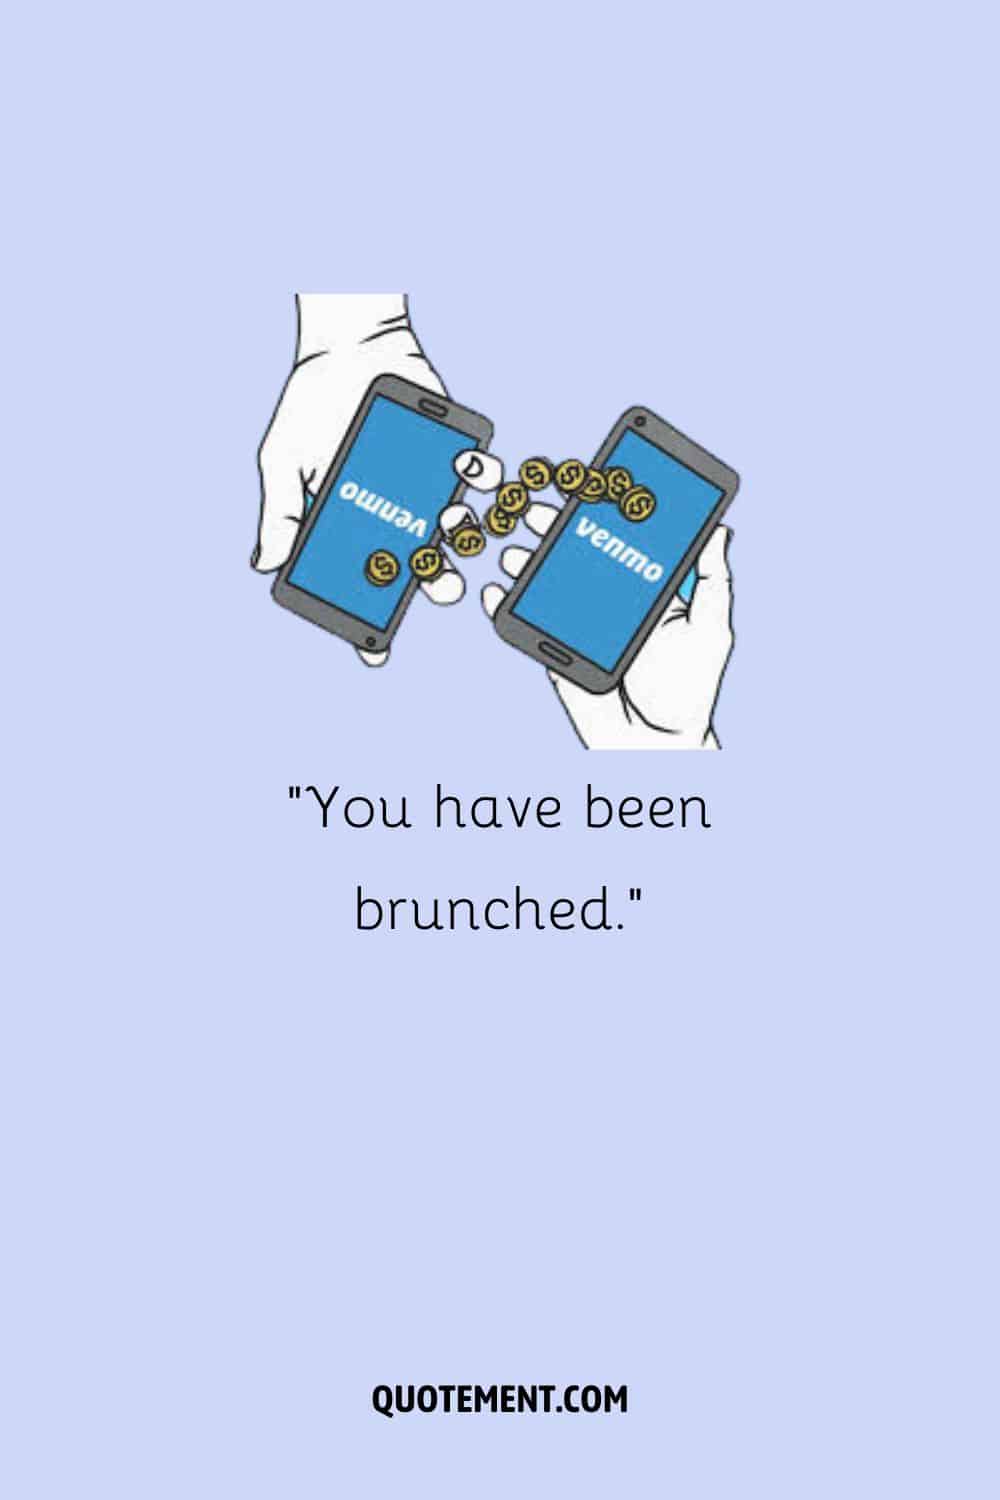 You have been brunched